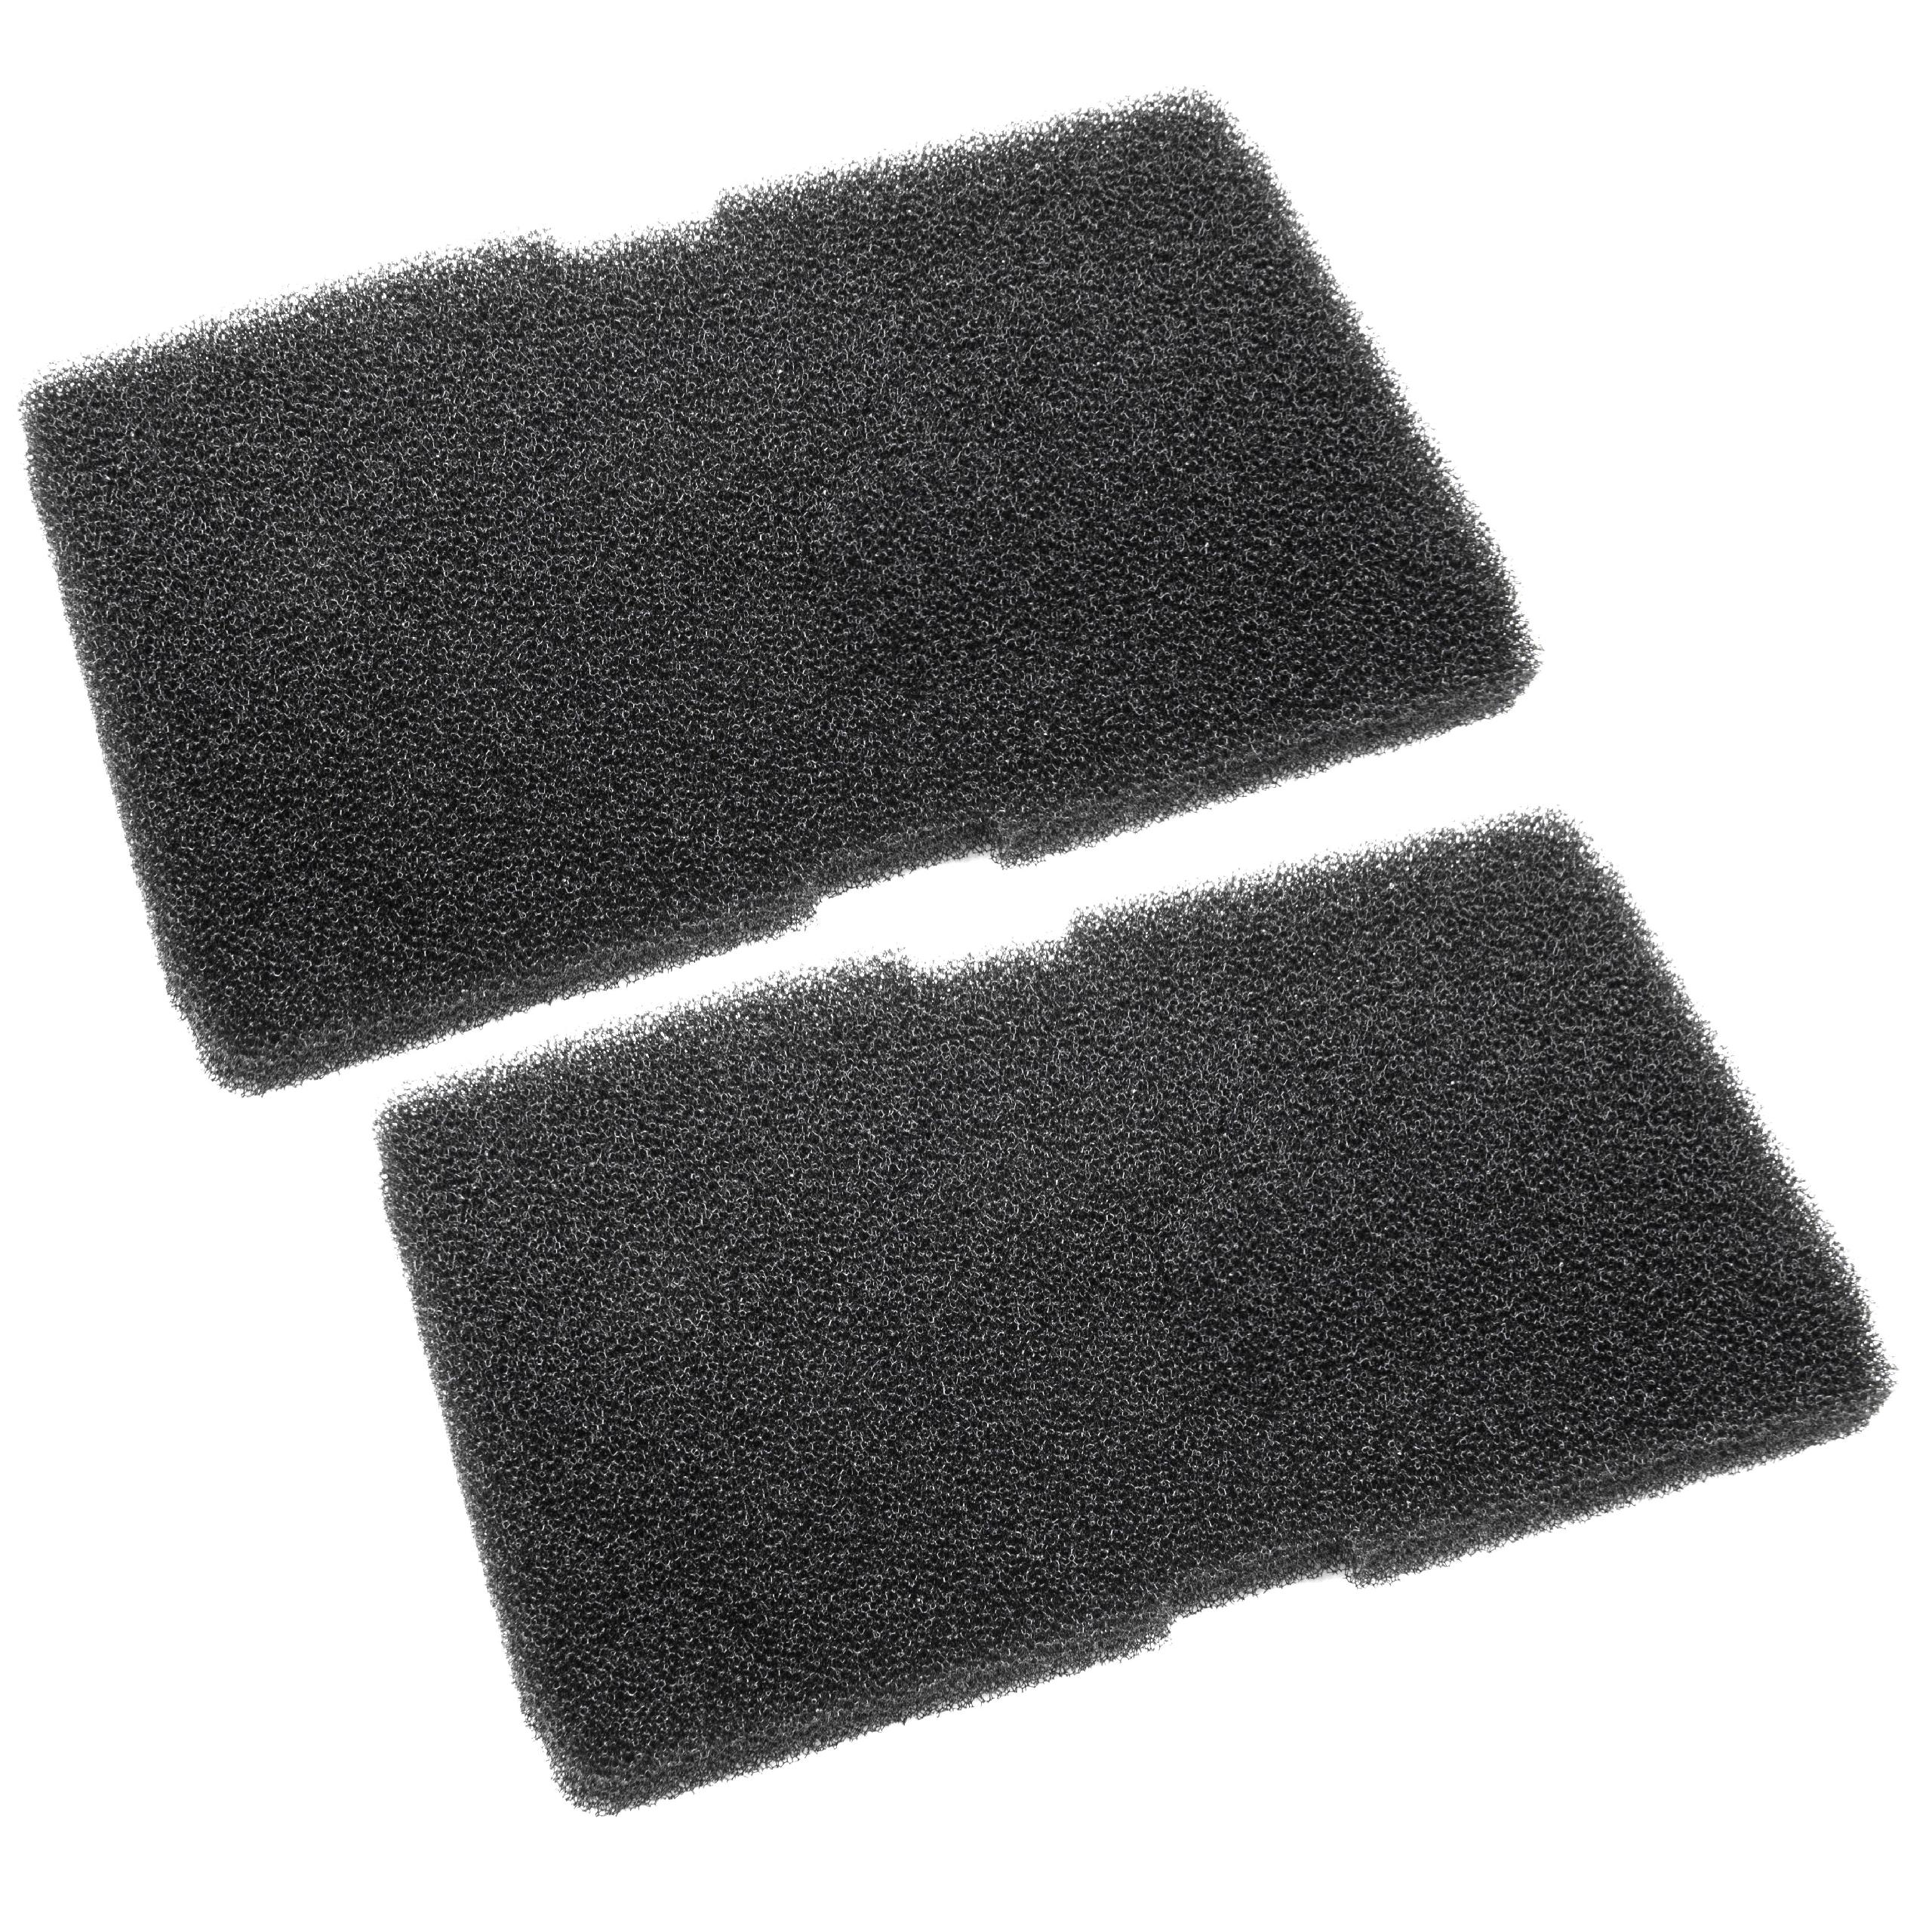 Filter Set (2x sponge filter) as Replacement for Blomberg 2964840200, 782372152 Tumble Dryer etc.